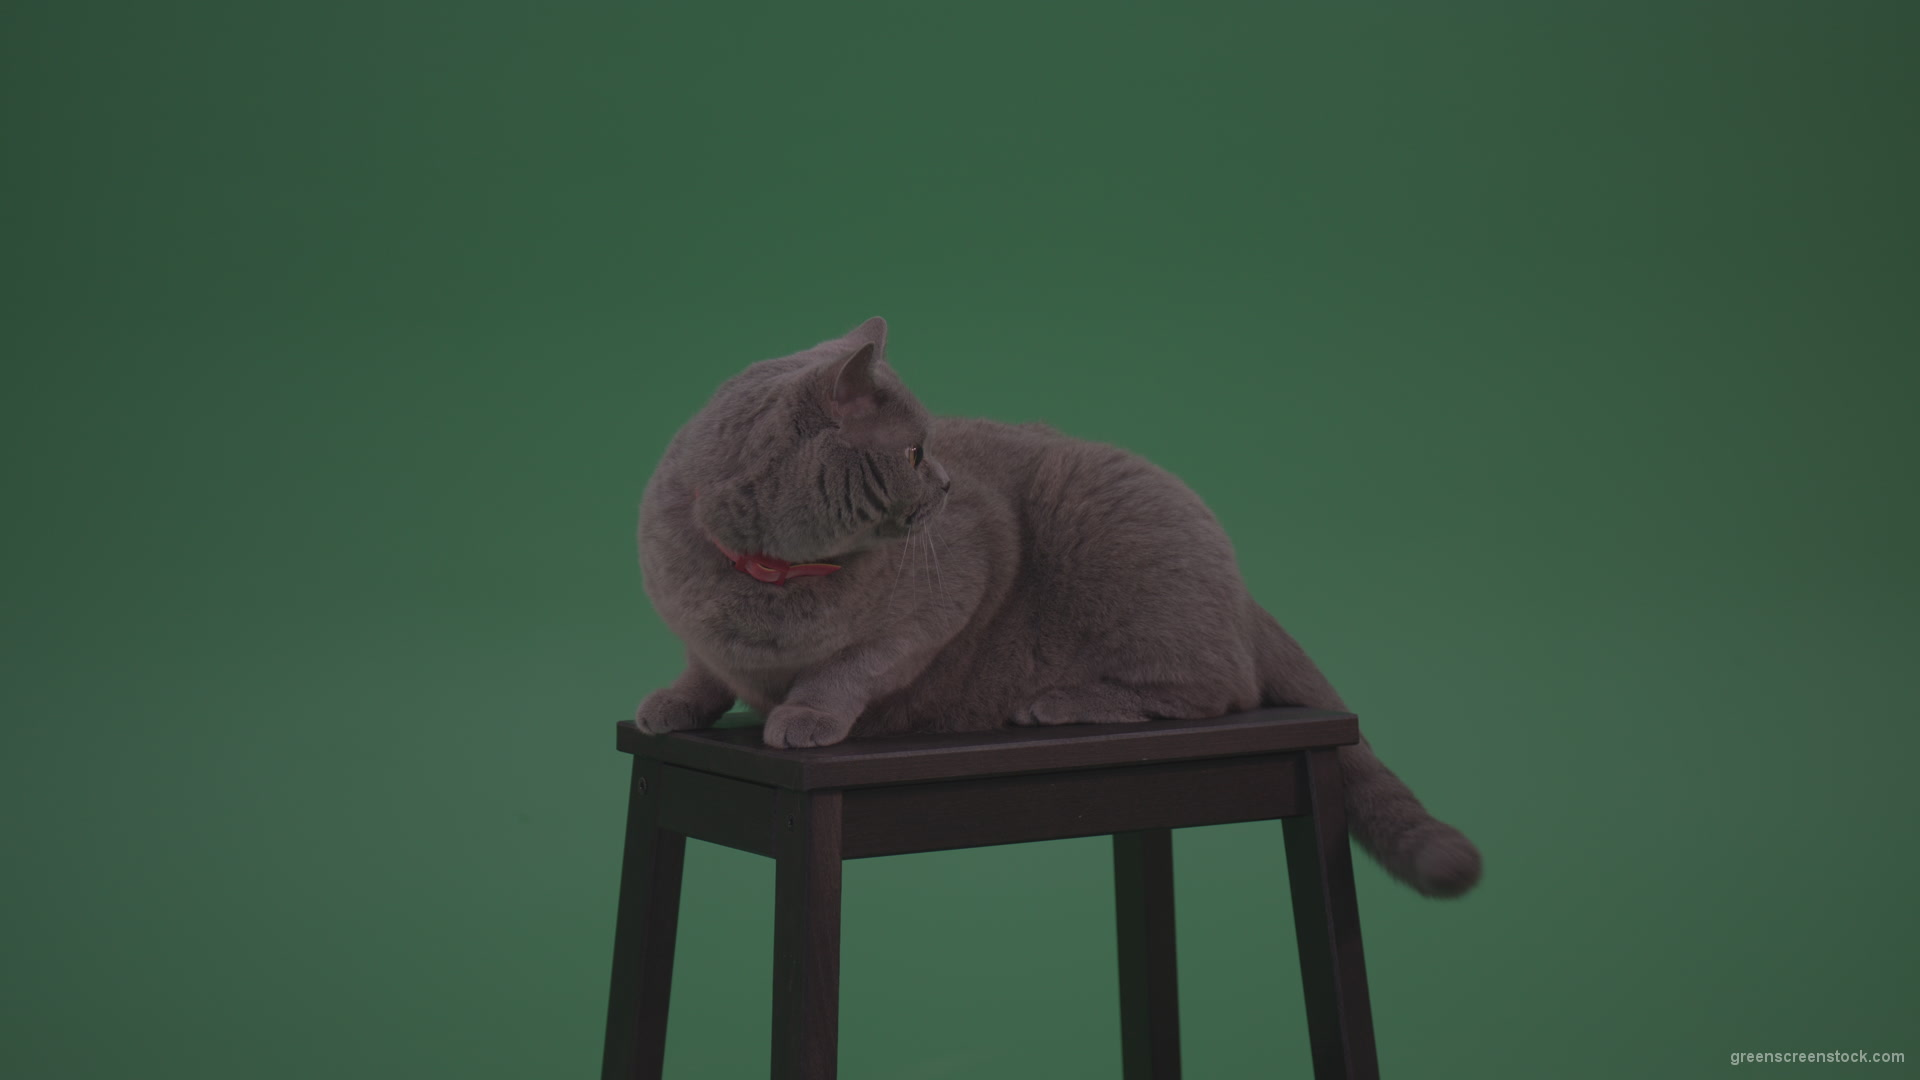 British-Gey-Cat-Sitting-On-Stool-Wagging-The-Tail-On_Green-Screen-Chroma-Key-Wall-Background_004 Green Screen Stock